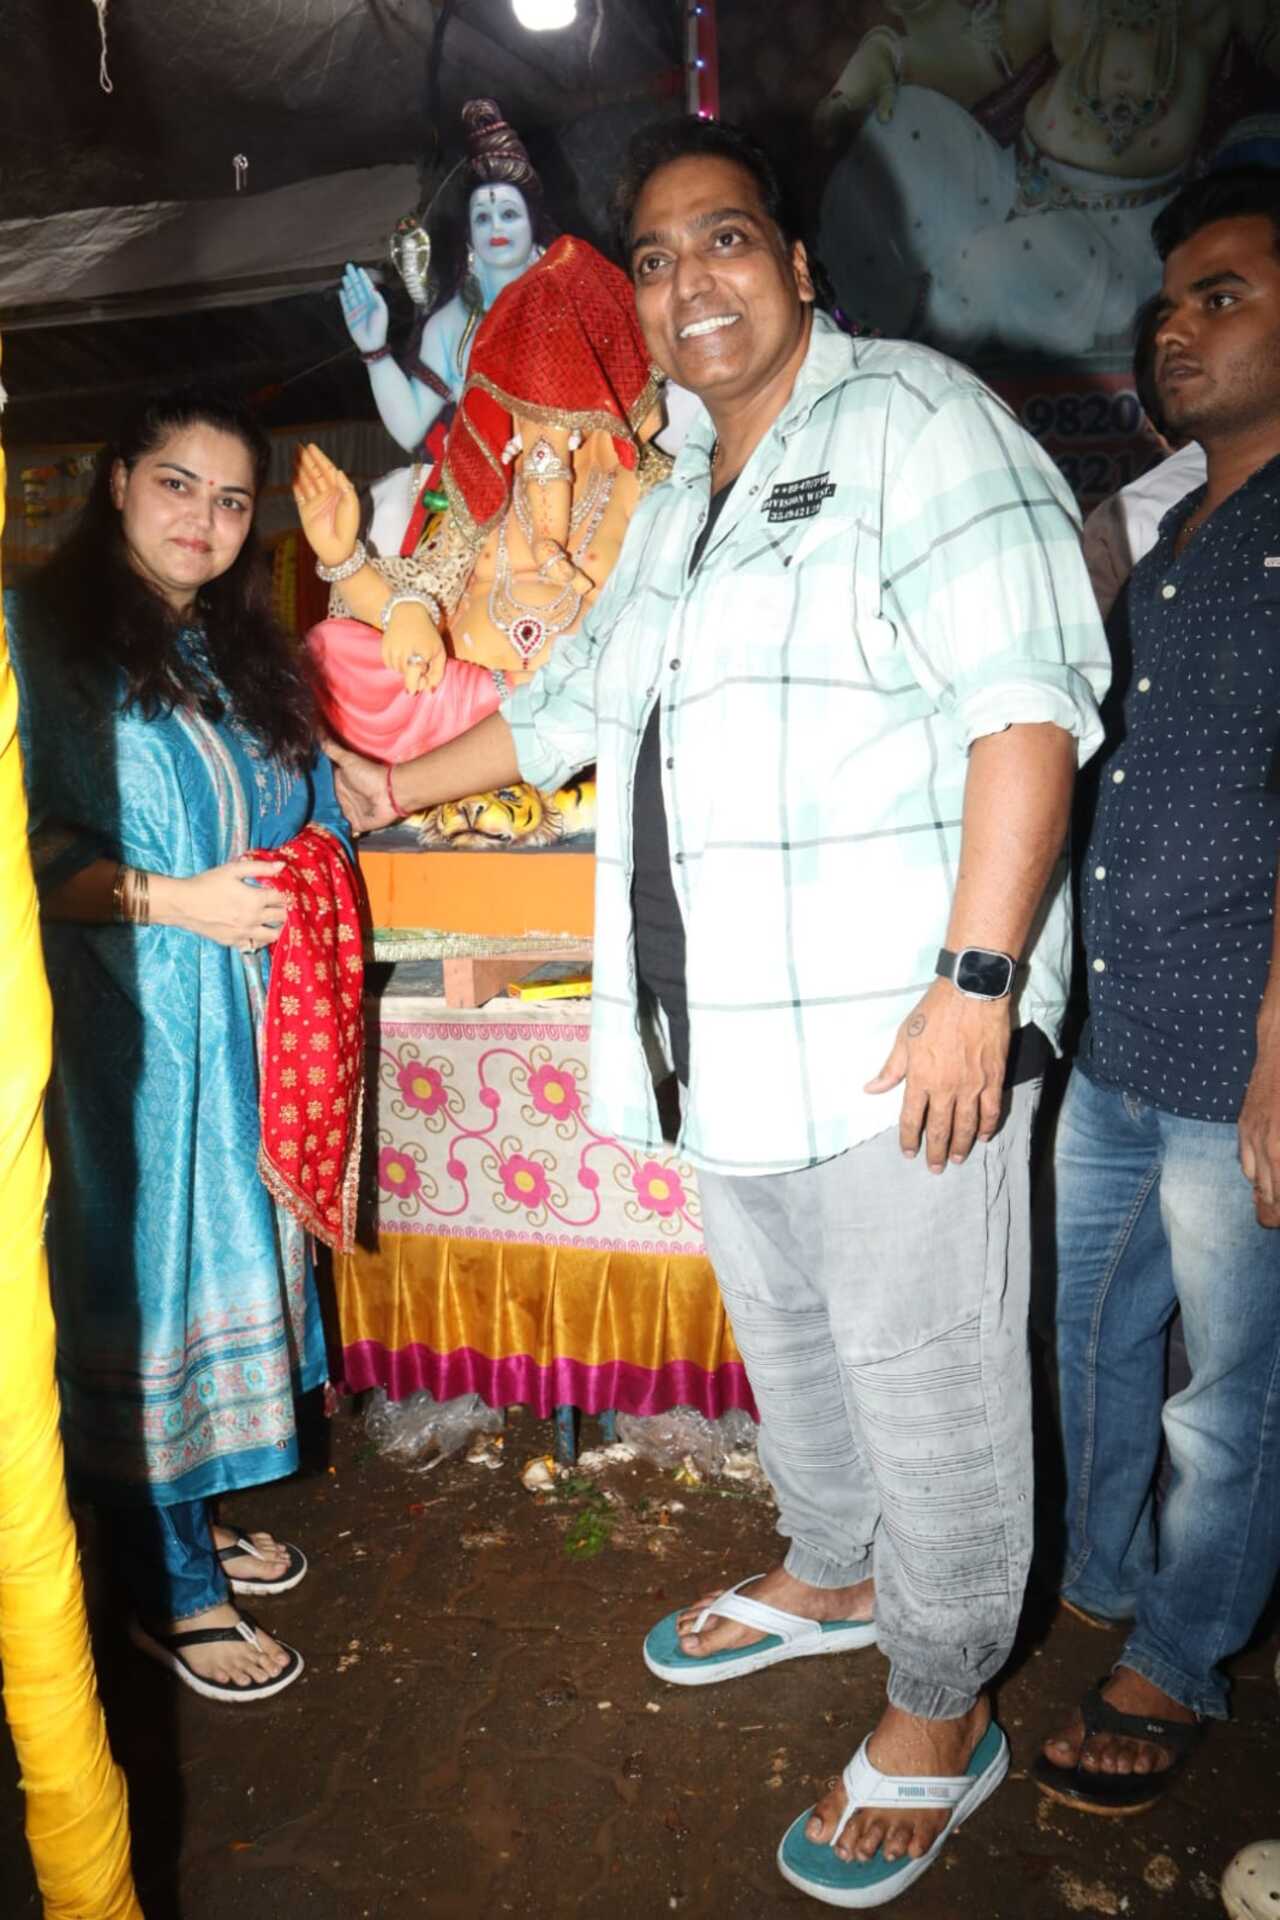 The choreographer poses with his wife in front of their Ganesha idol